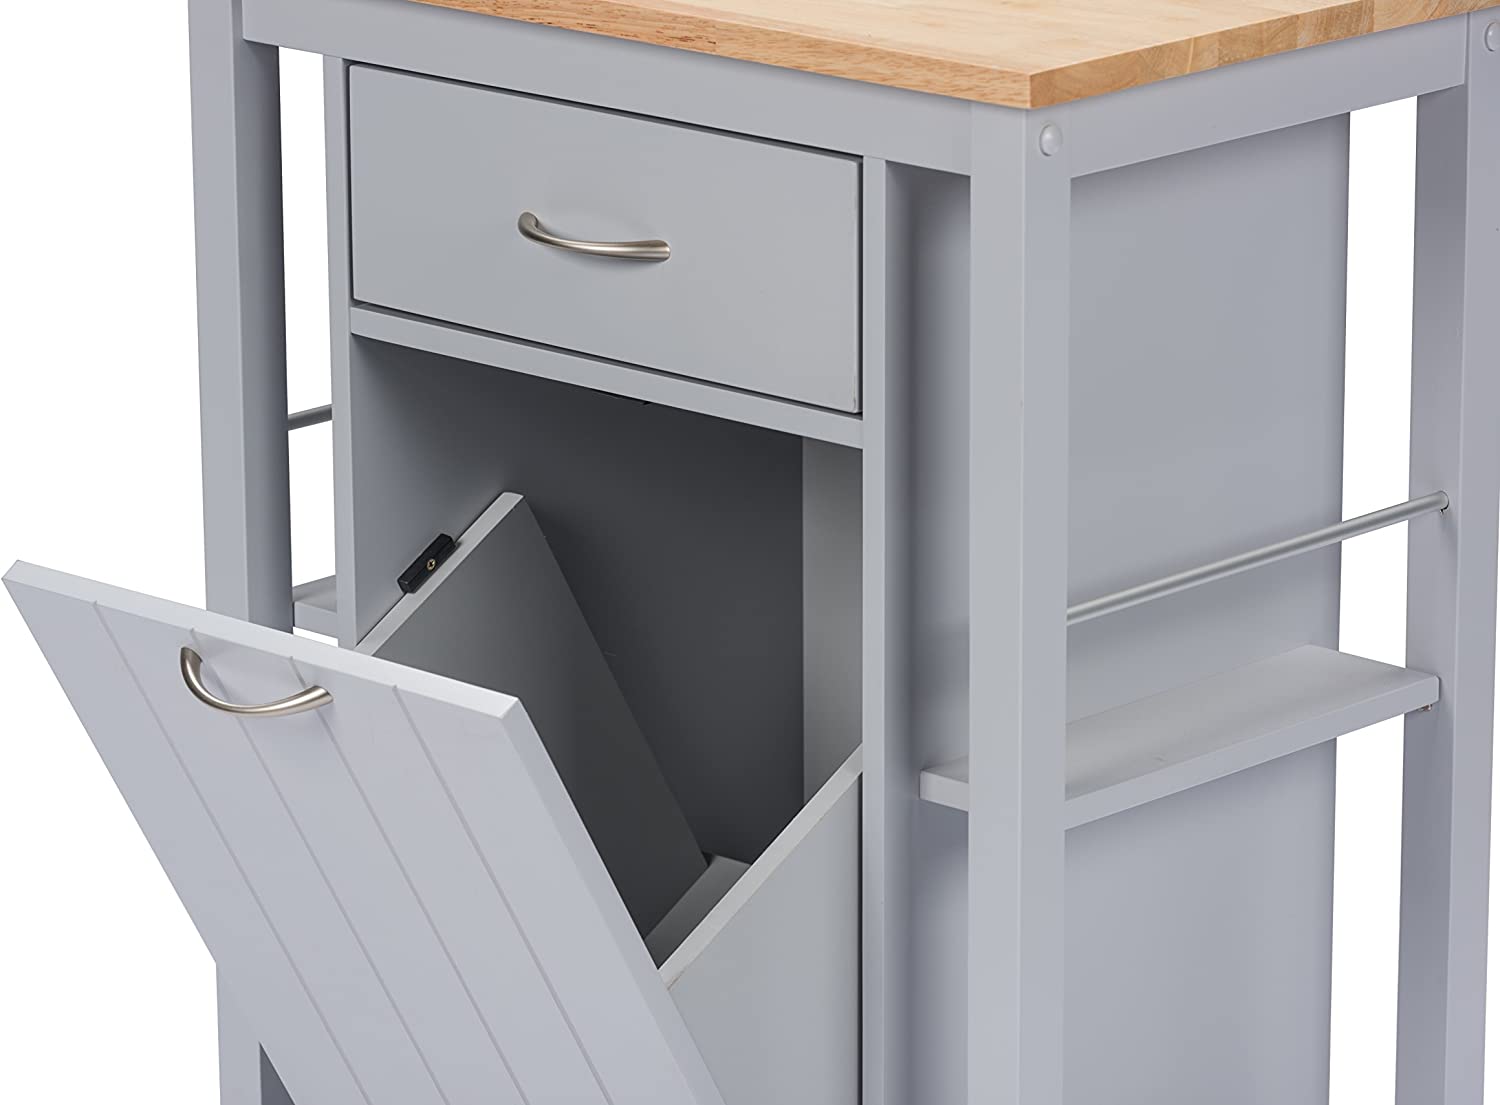 Baxton Studio Yonkers Contemporary Kitchen Cart with Wood Top, Light Grey